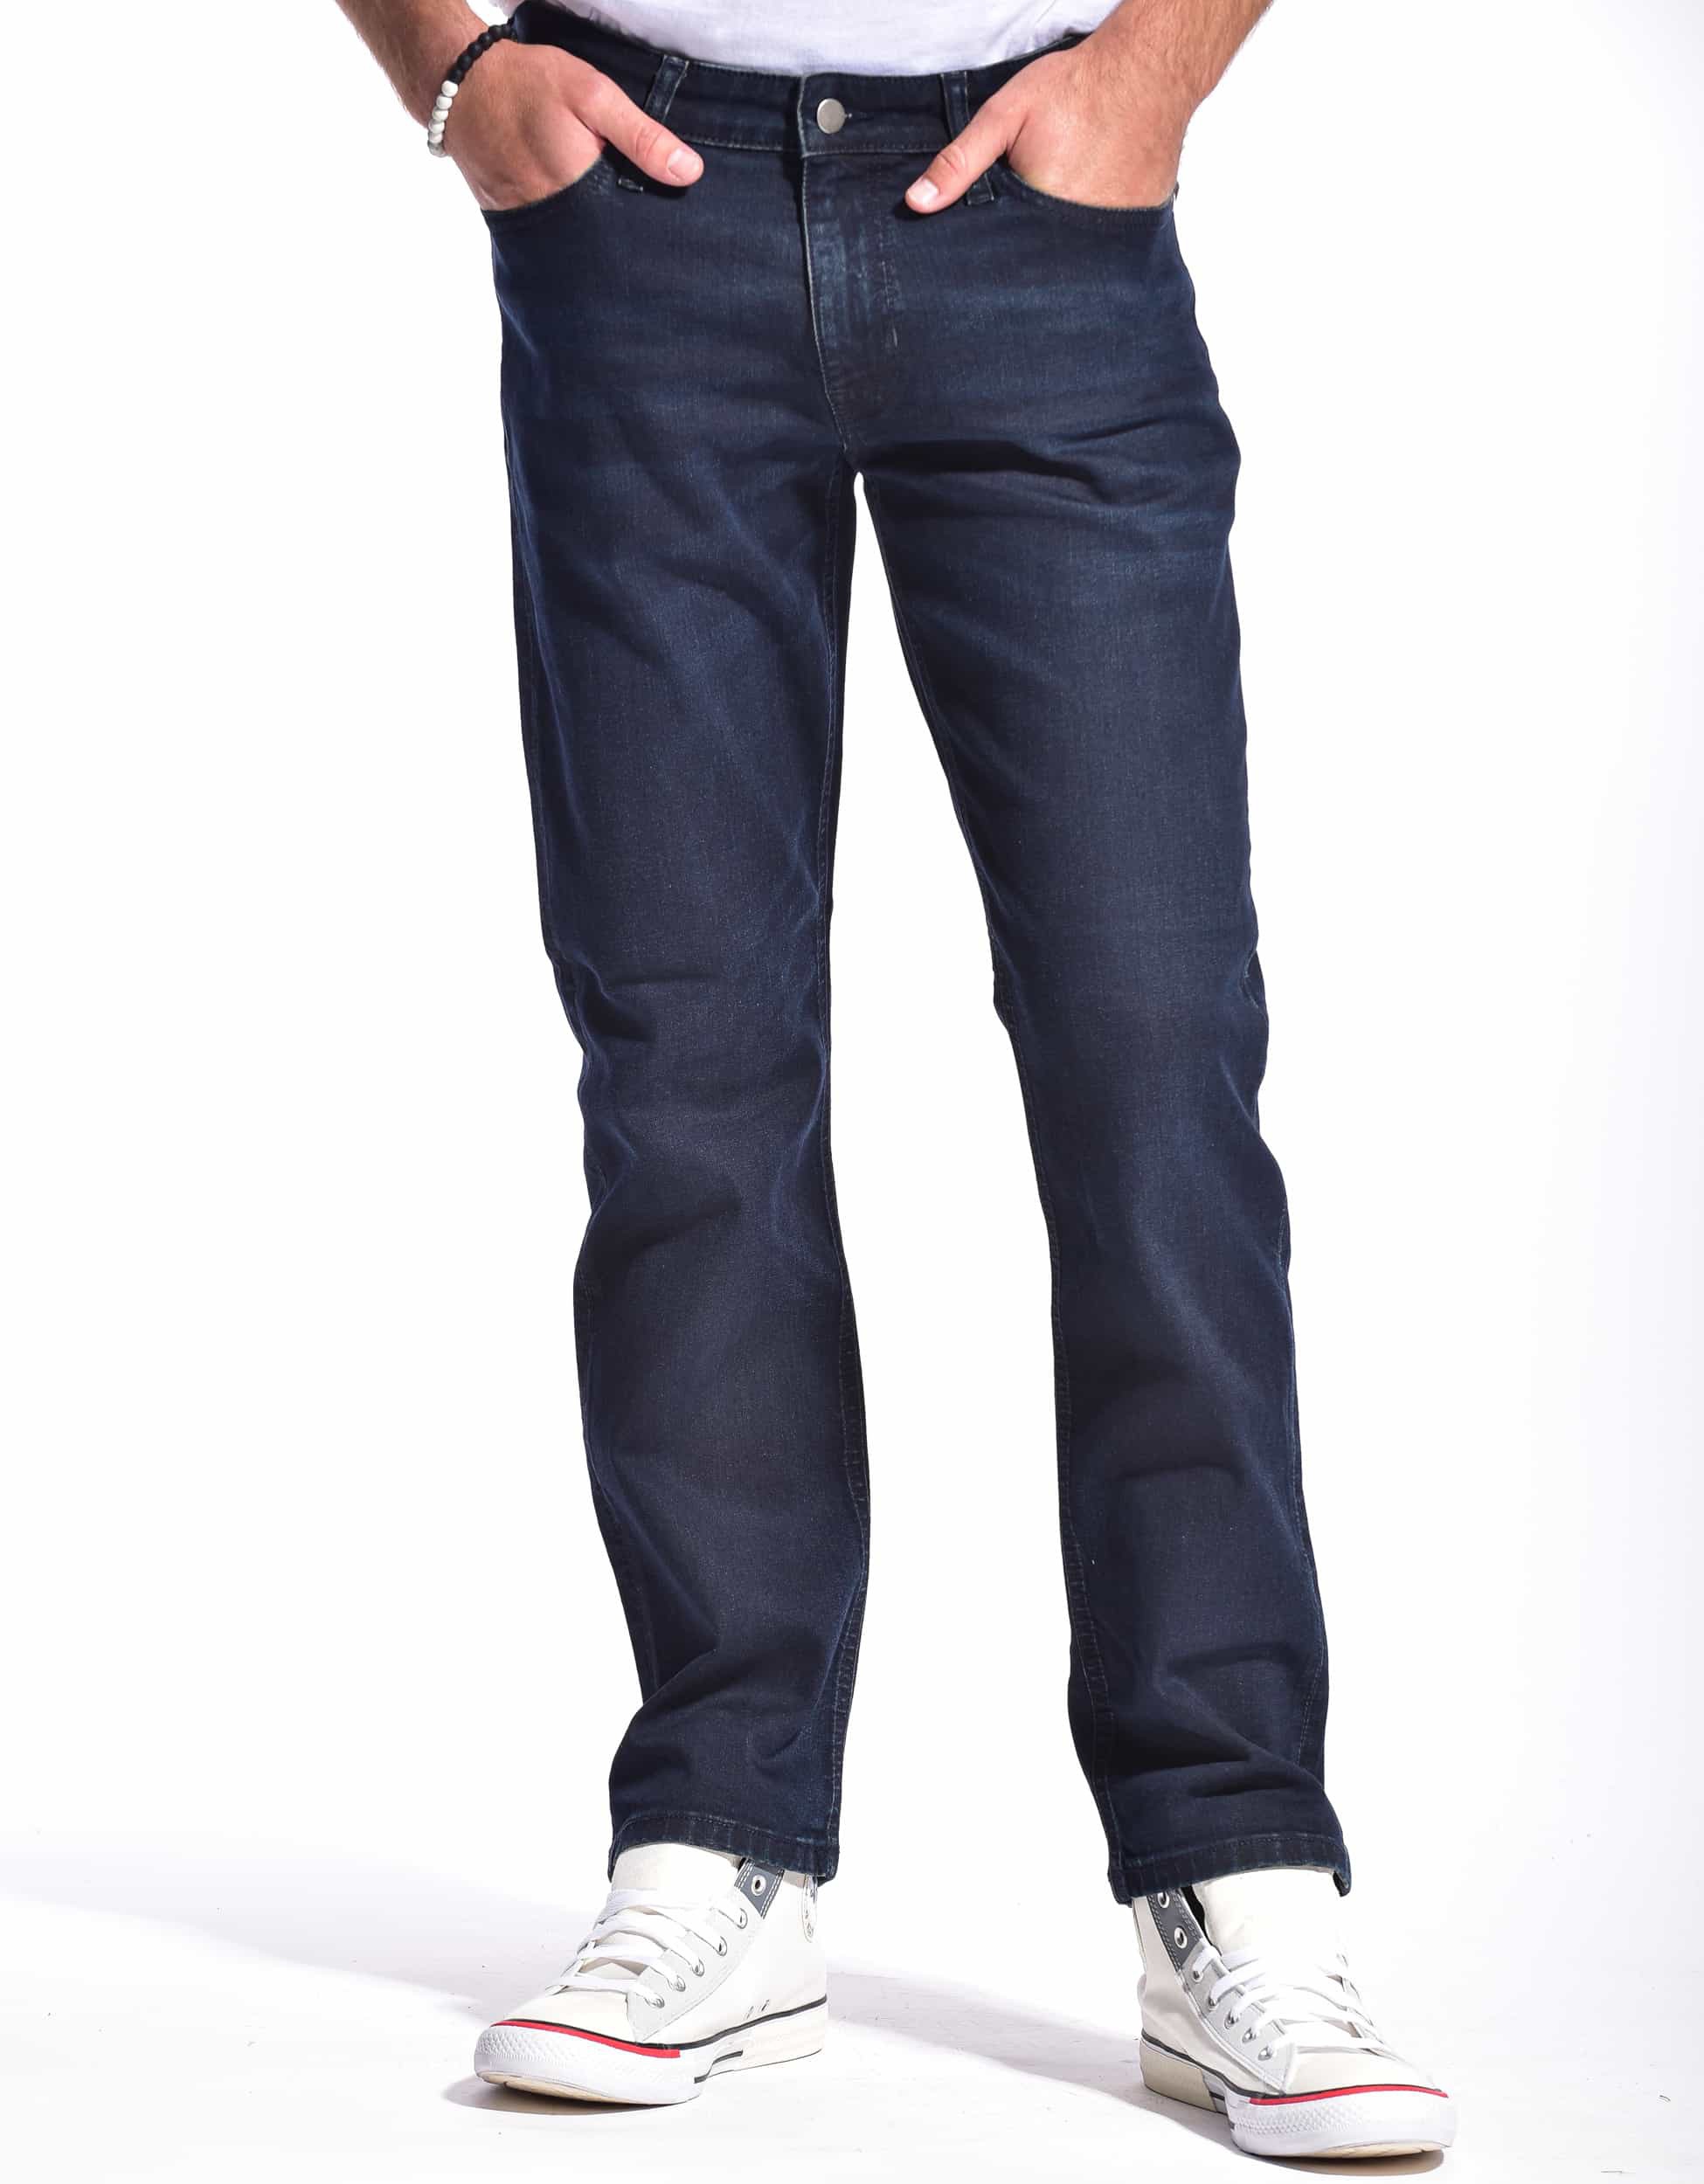 DEPARTED MEN'S PARK AVENUE STRAIGHT JEANS - image 1 of 11